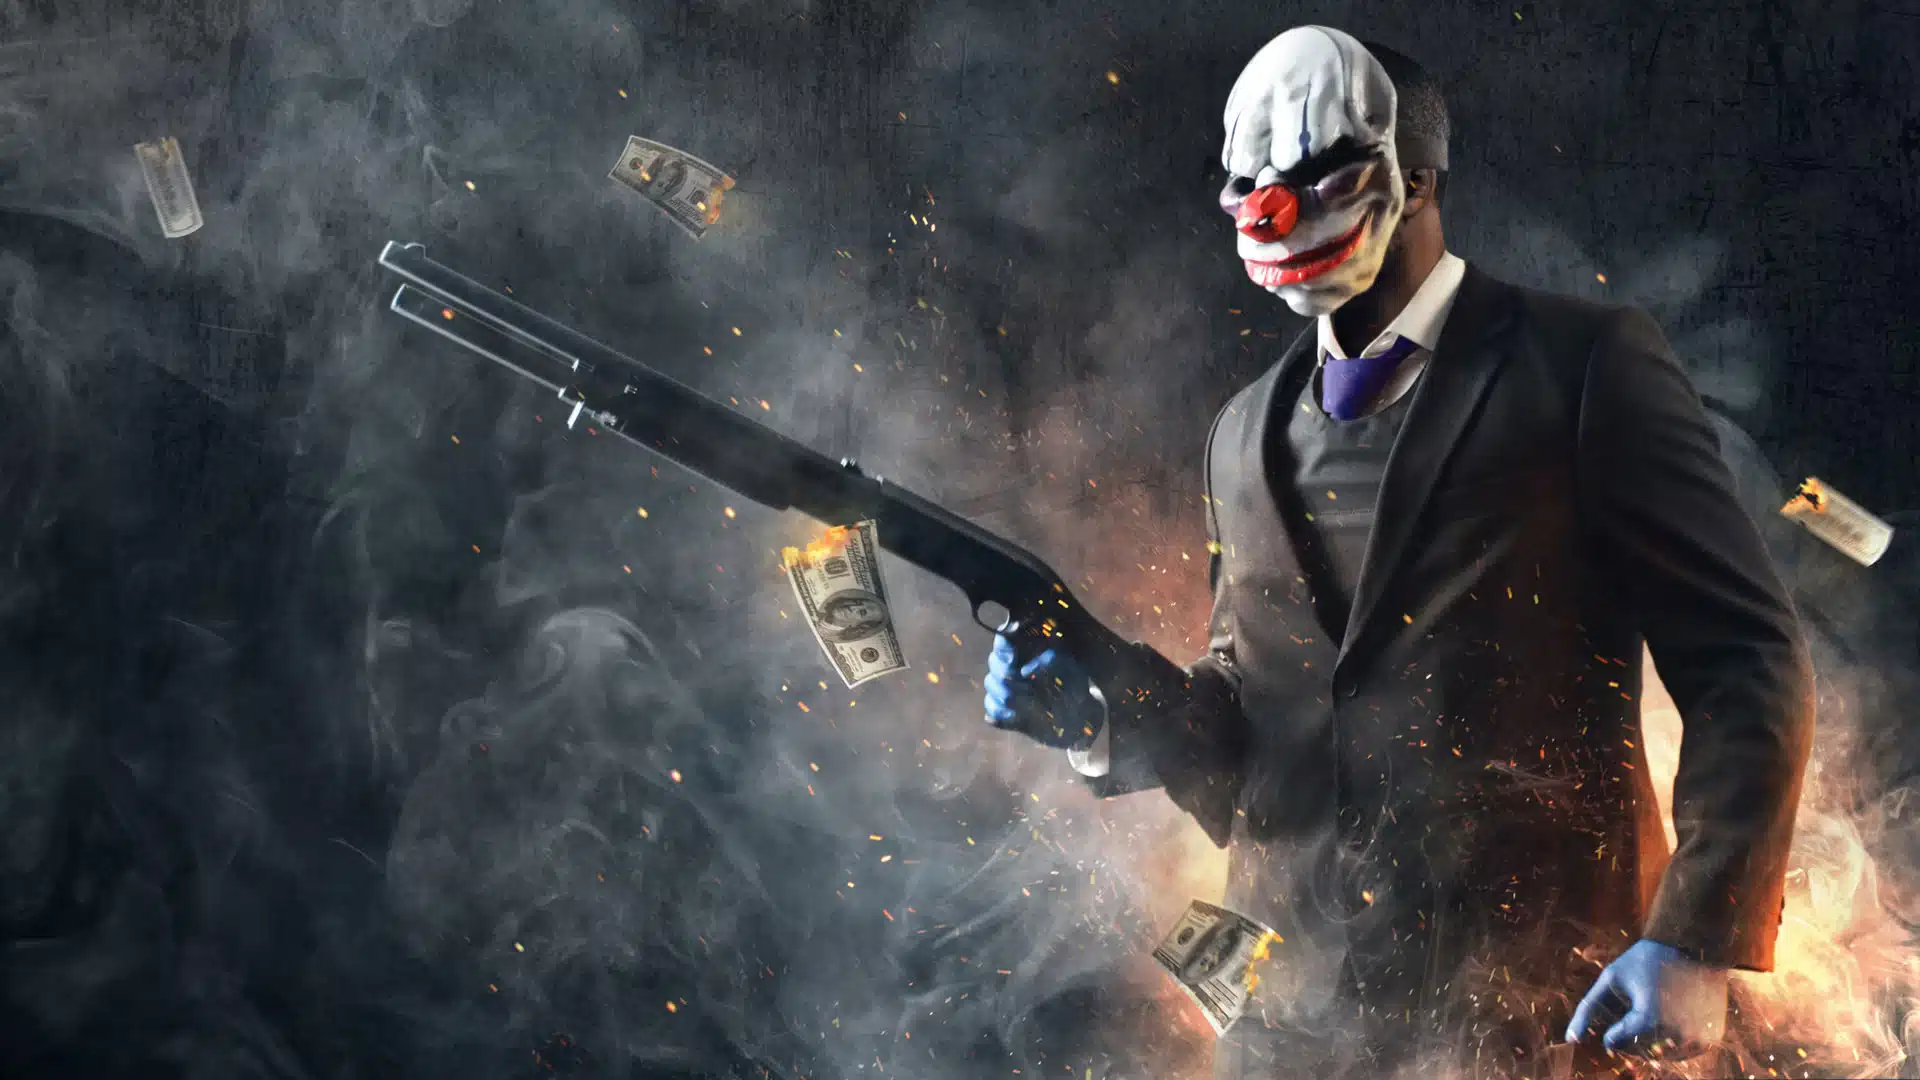 Payday 3 update 1.000.016